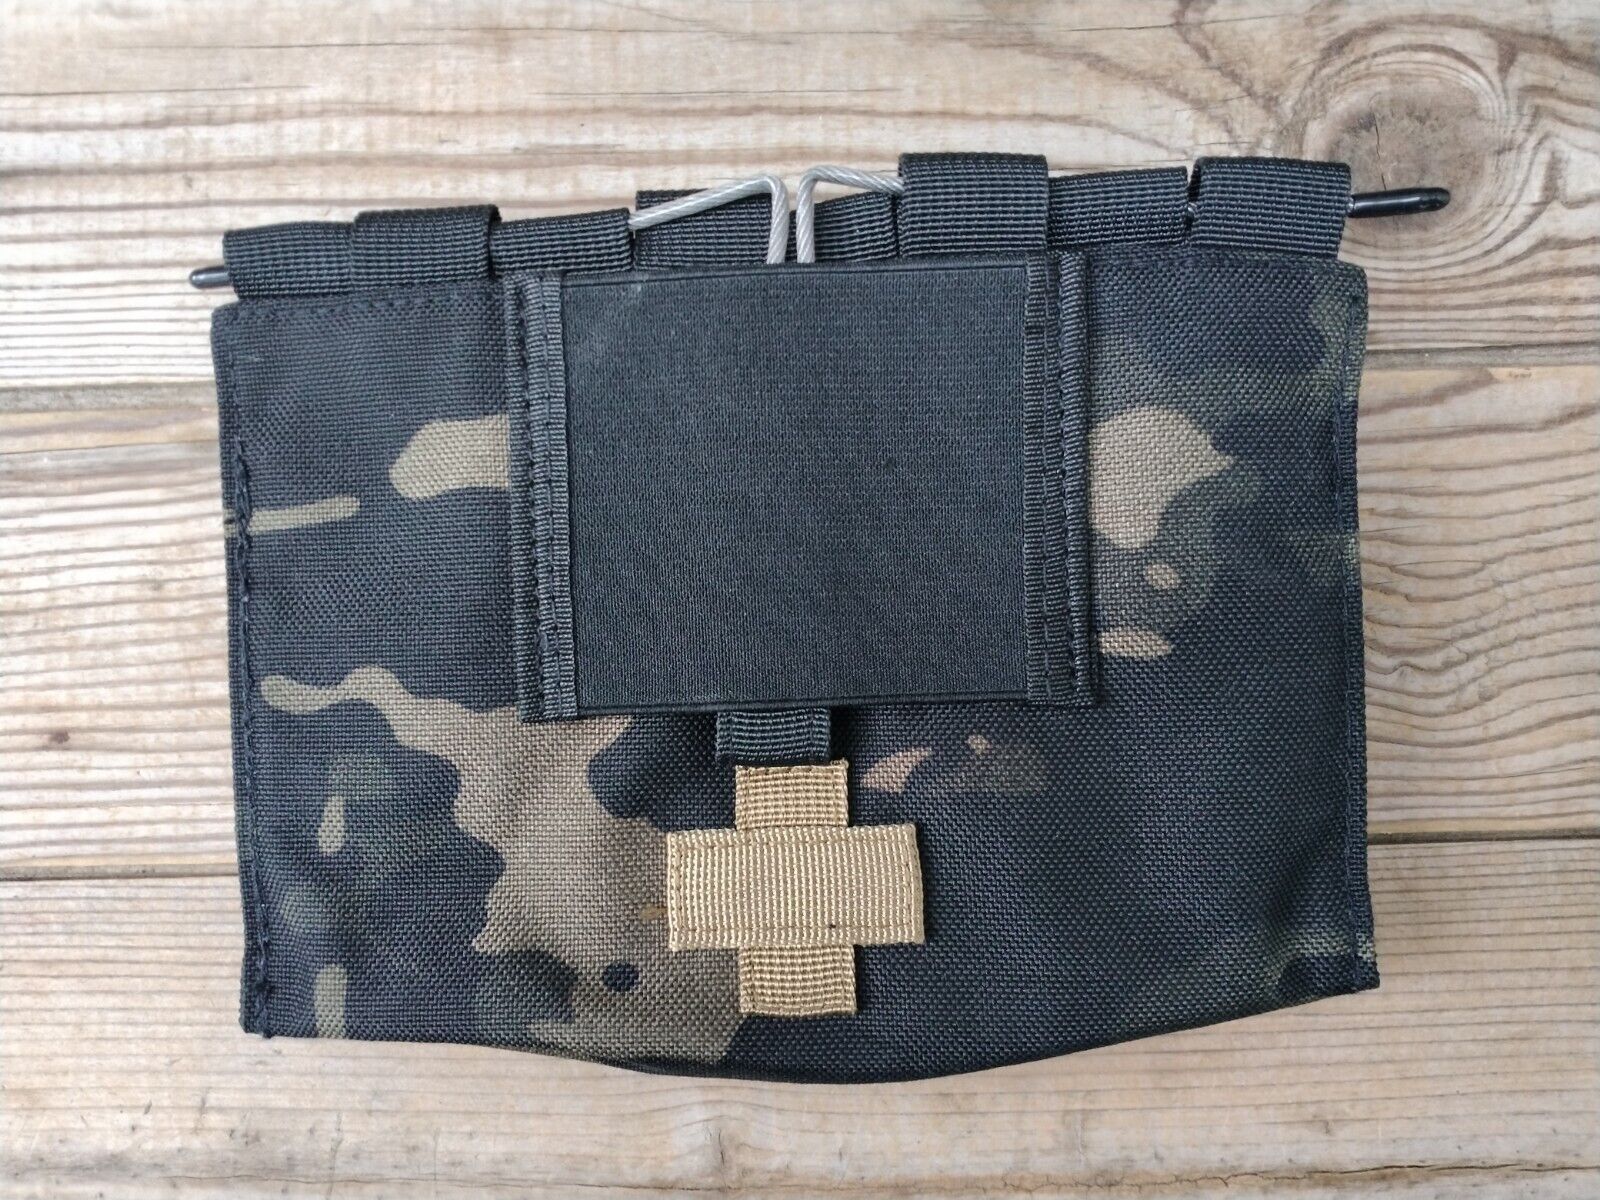 LBT STYLE MULTICAM BLACK BLOW OUT MEDICAL TRAUMA KIT FIRST AID IFAK POUCH